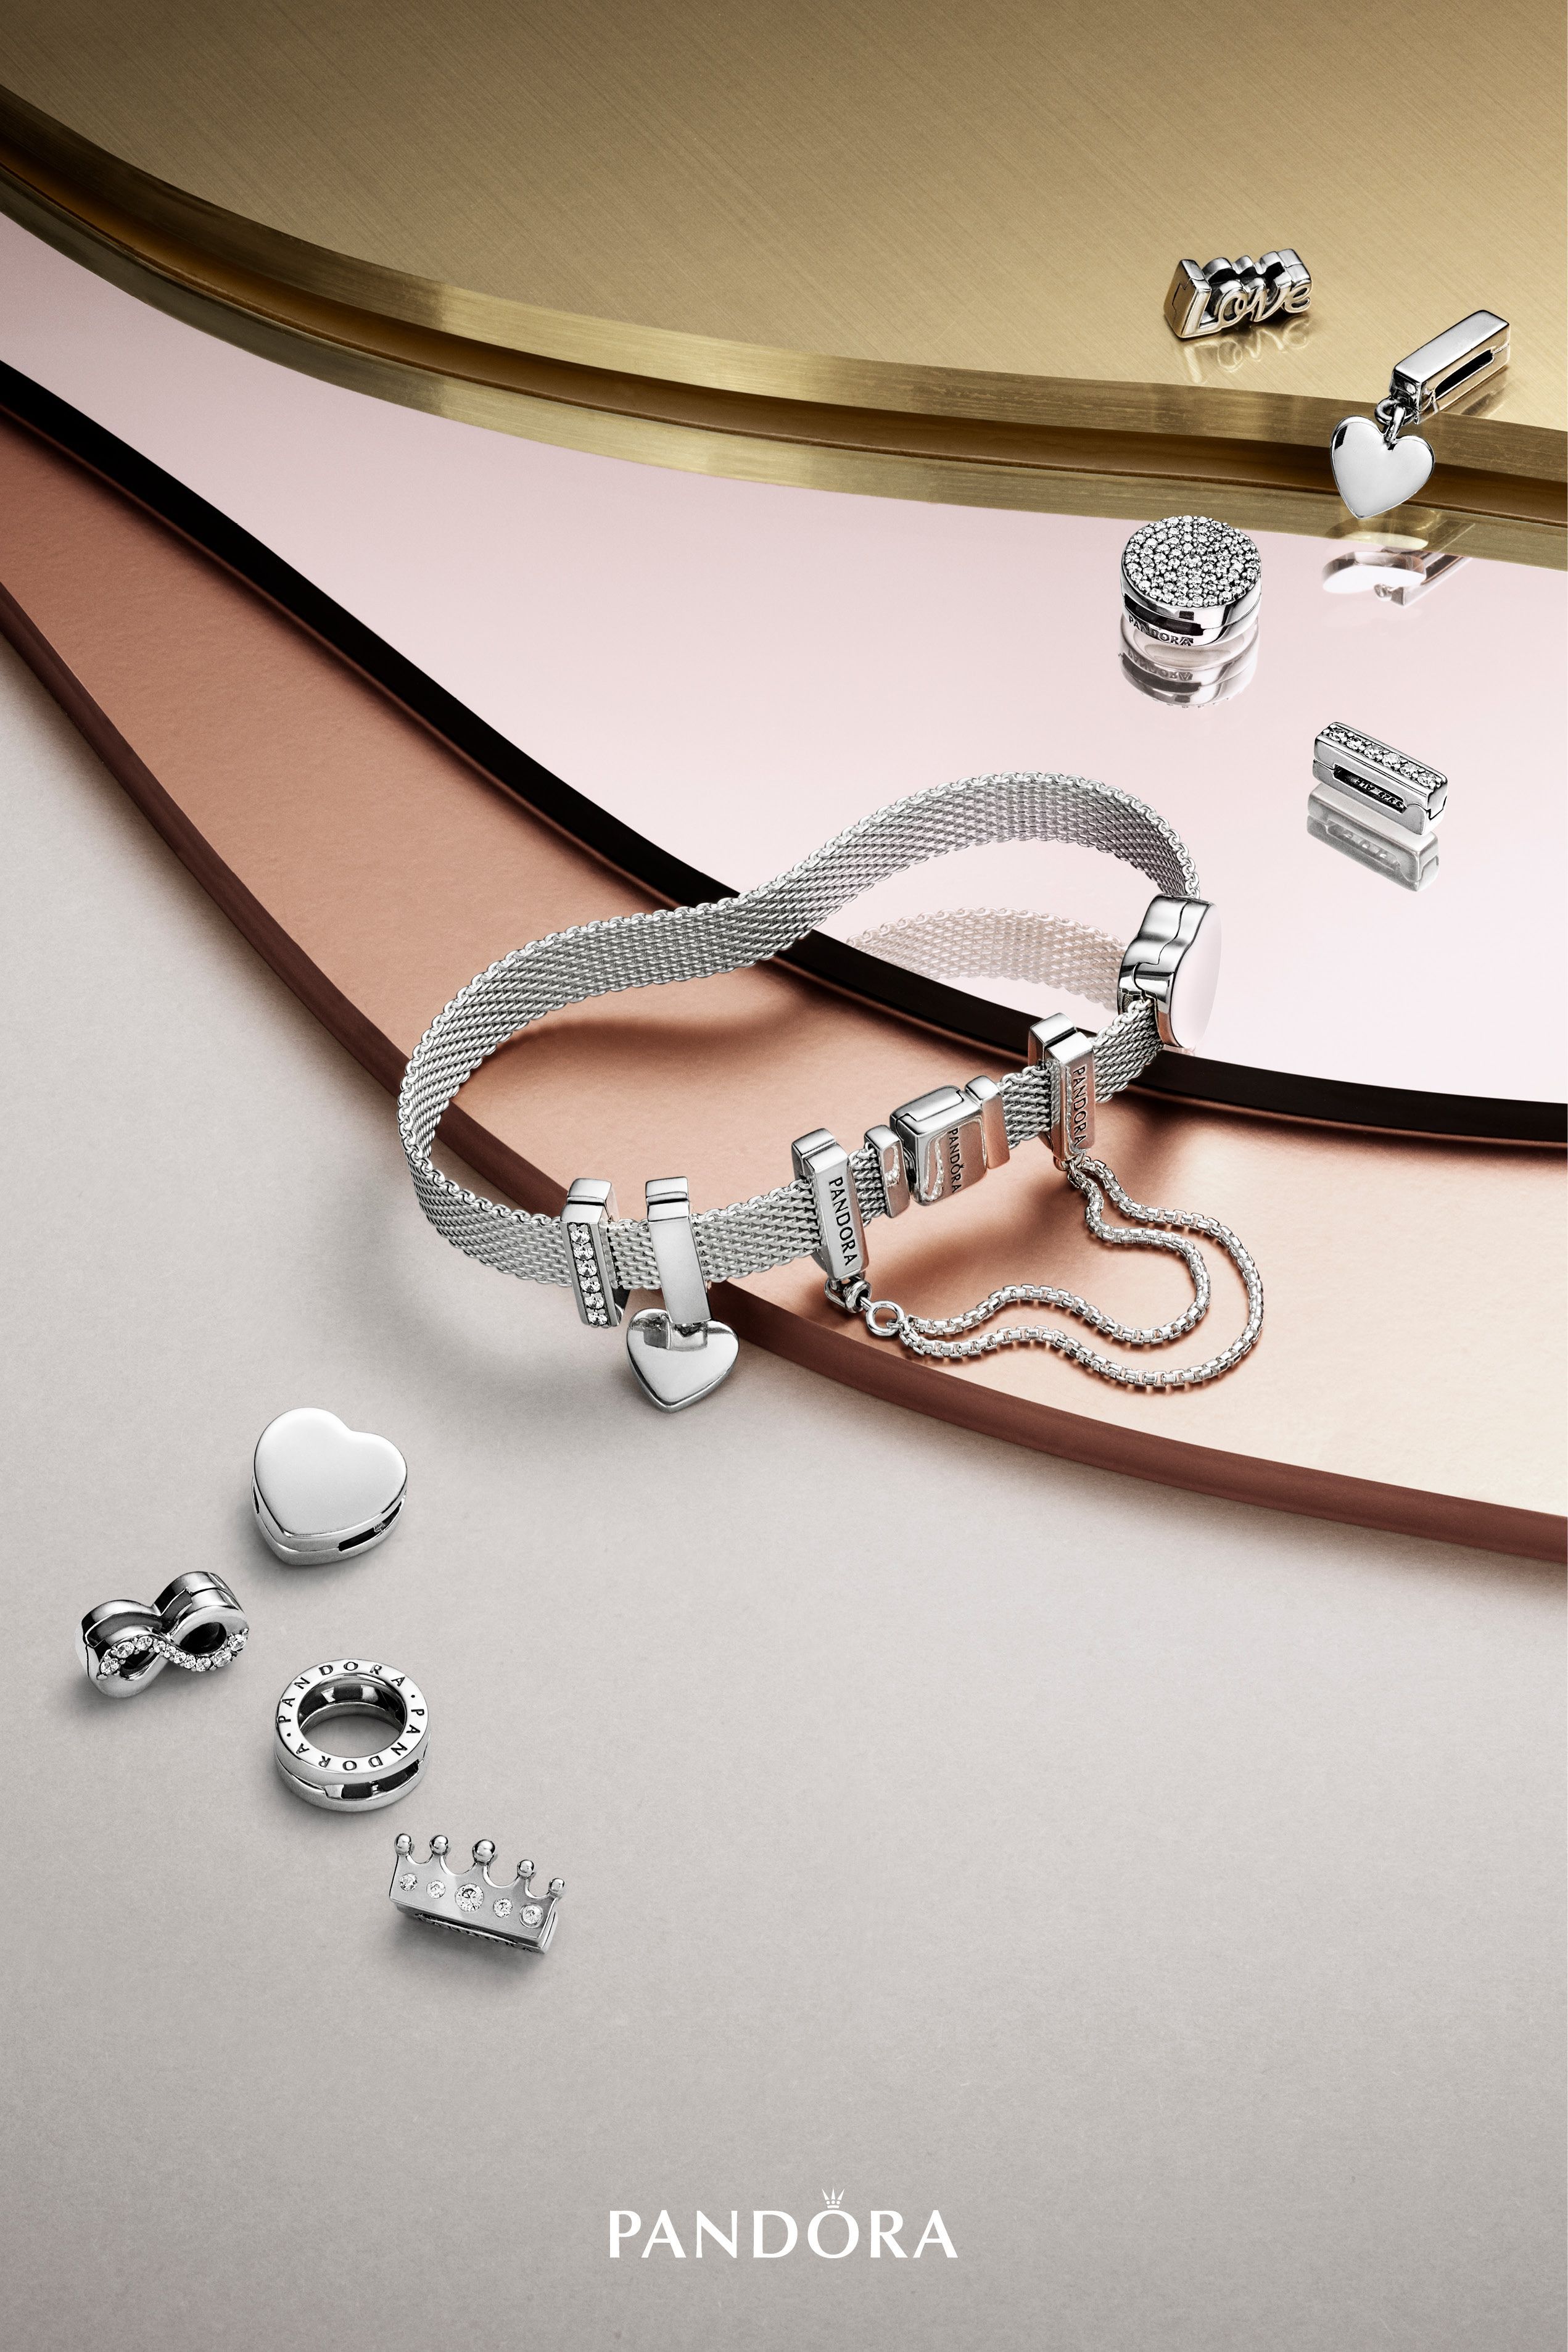 Inspiredmodern Femininity, Pandora Reflexions Marks A New Era Of Inside Most Recently Released Pandora Moments Medium O Pendant Necklaces (View 7 of 25)